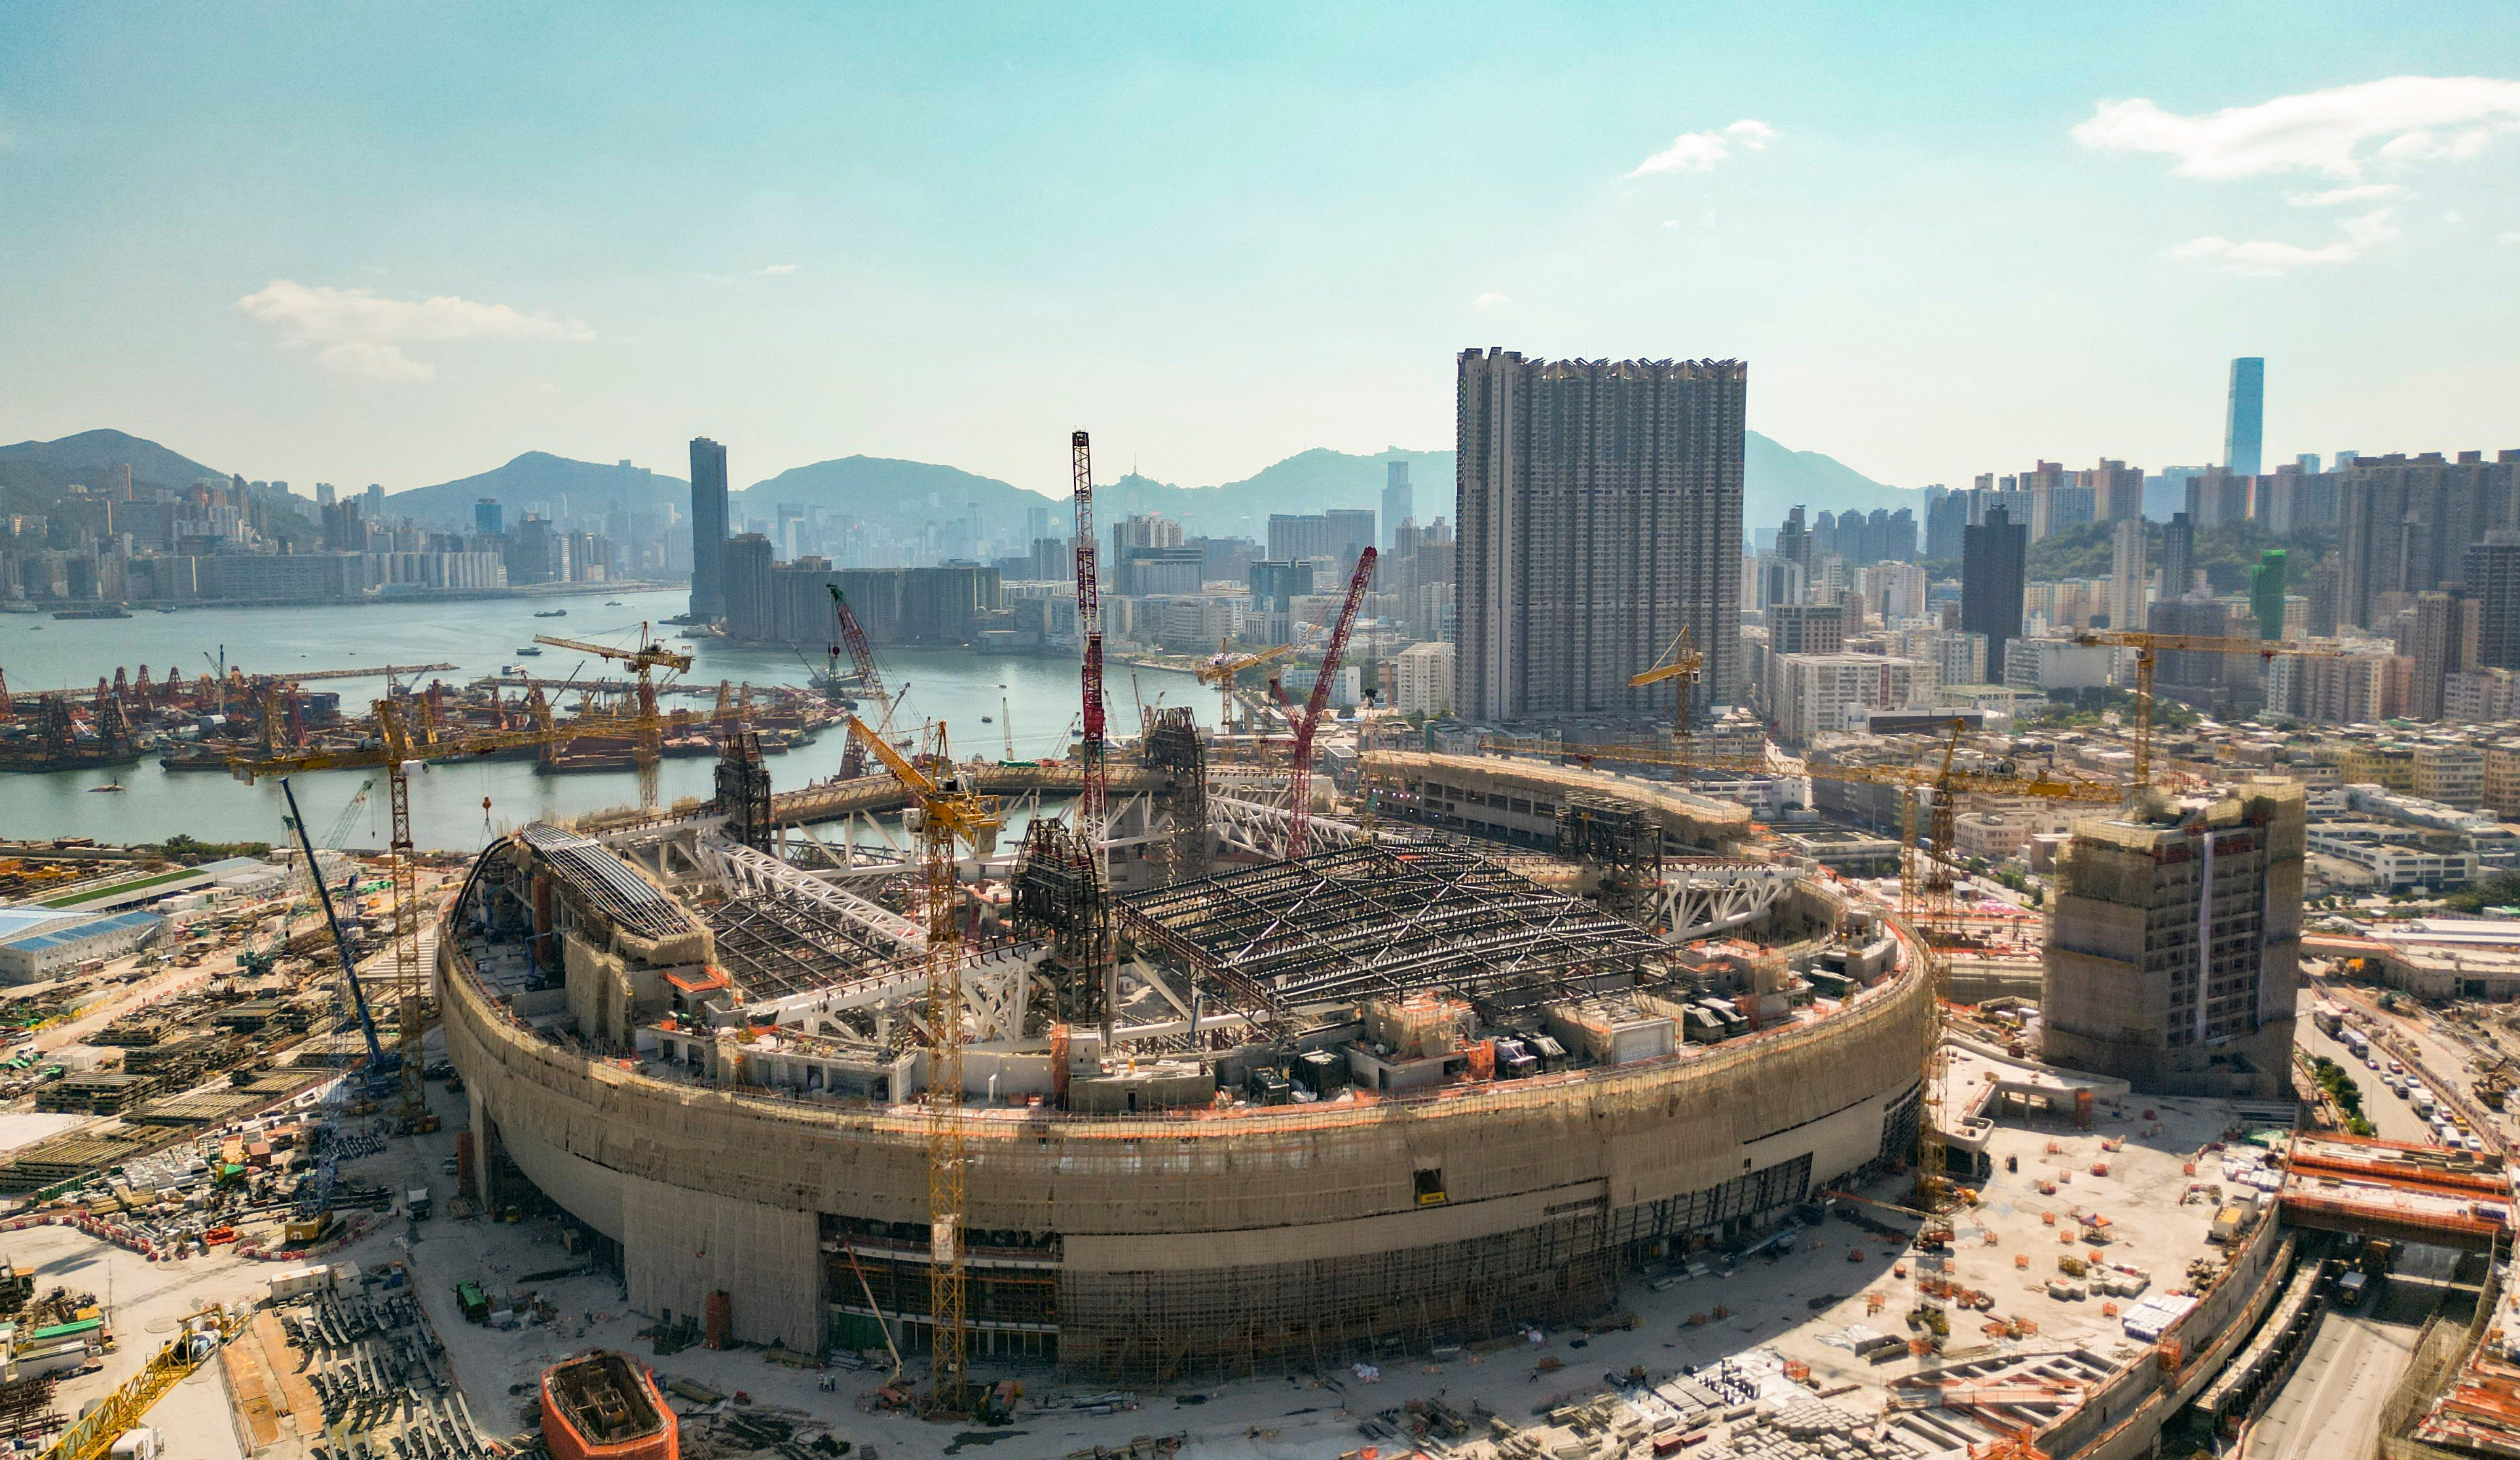 Work at Kai Tak Sport Park was delayed during the pandemic but it will open by the end of 2024, officials have said. Photo: Dickson Lee